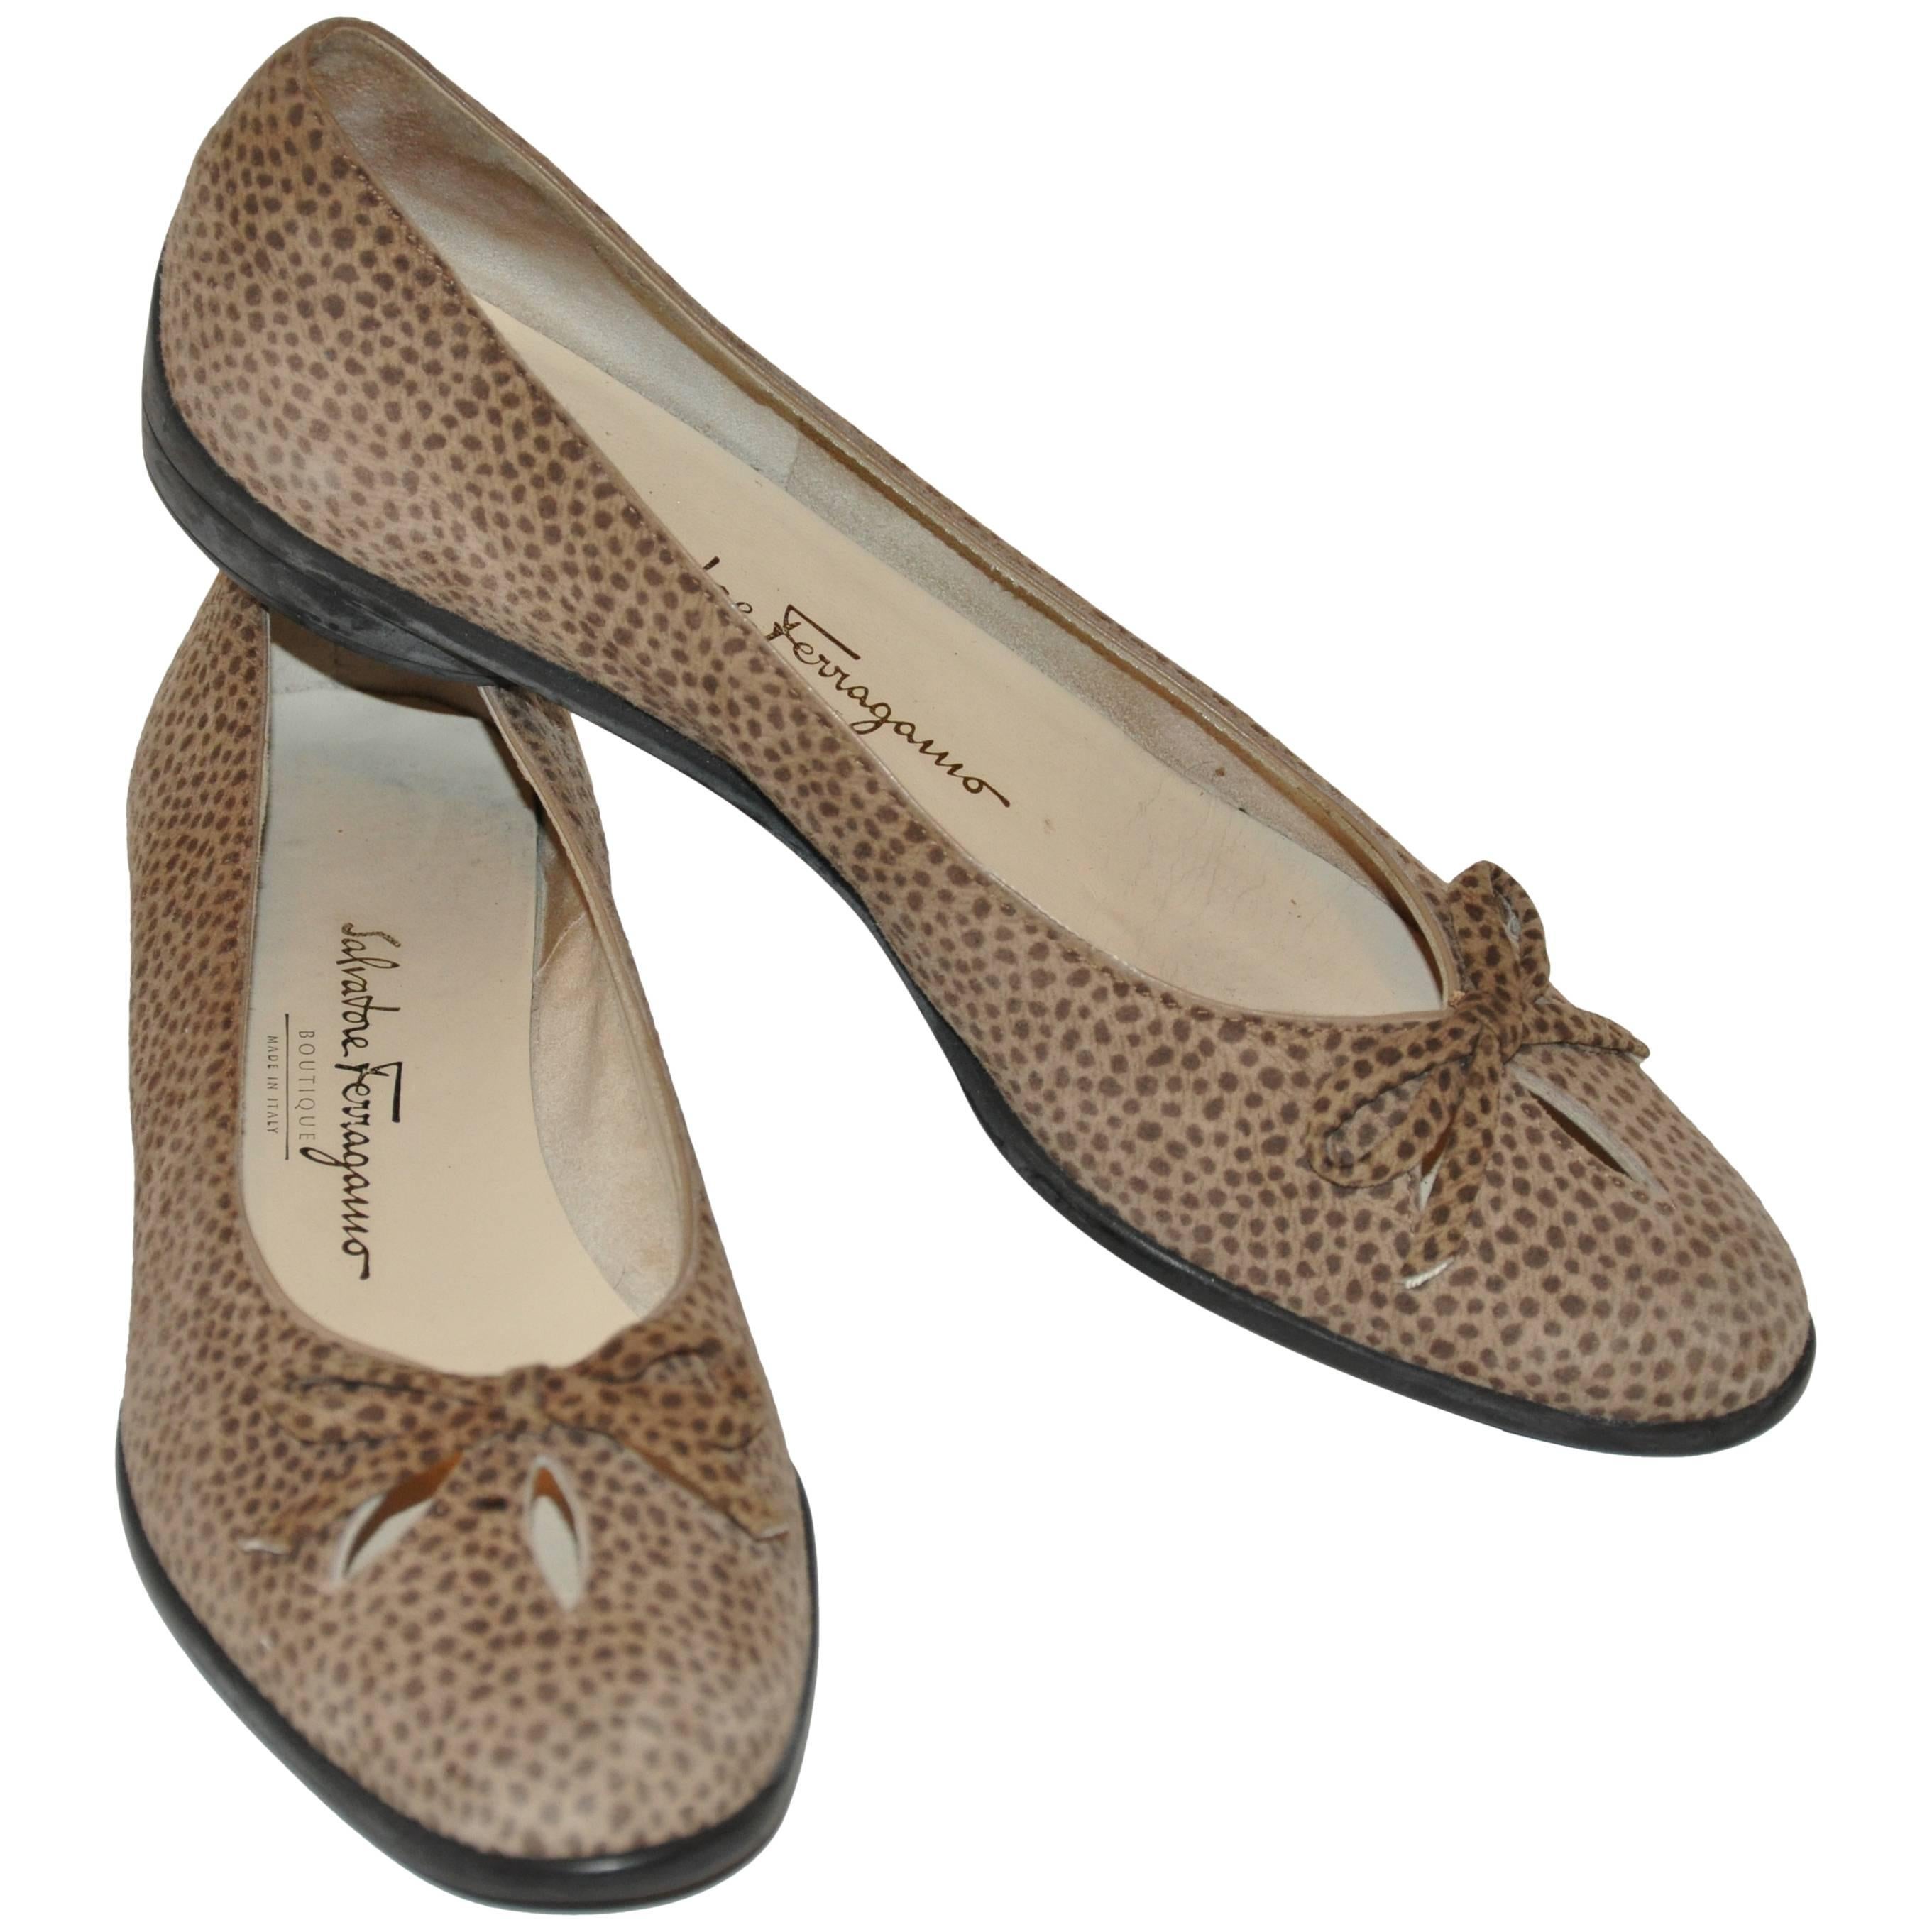 Ferragamo "Boutique" Taupe & Brown Lambskin Suede "Bow" Front Flats